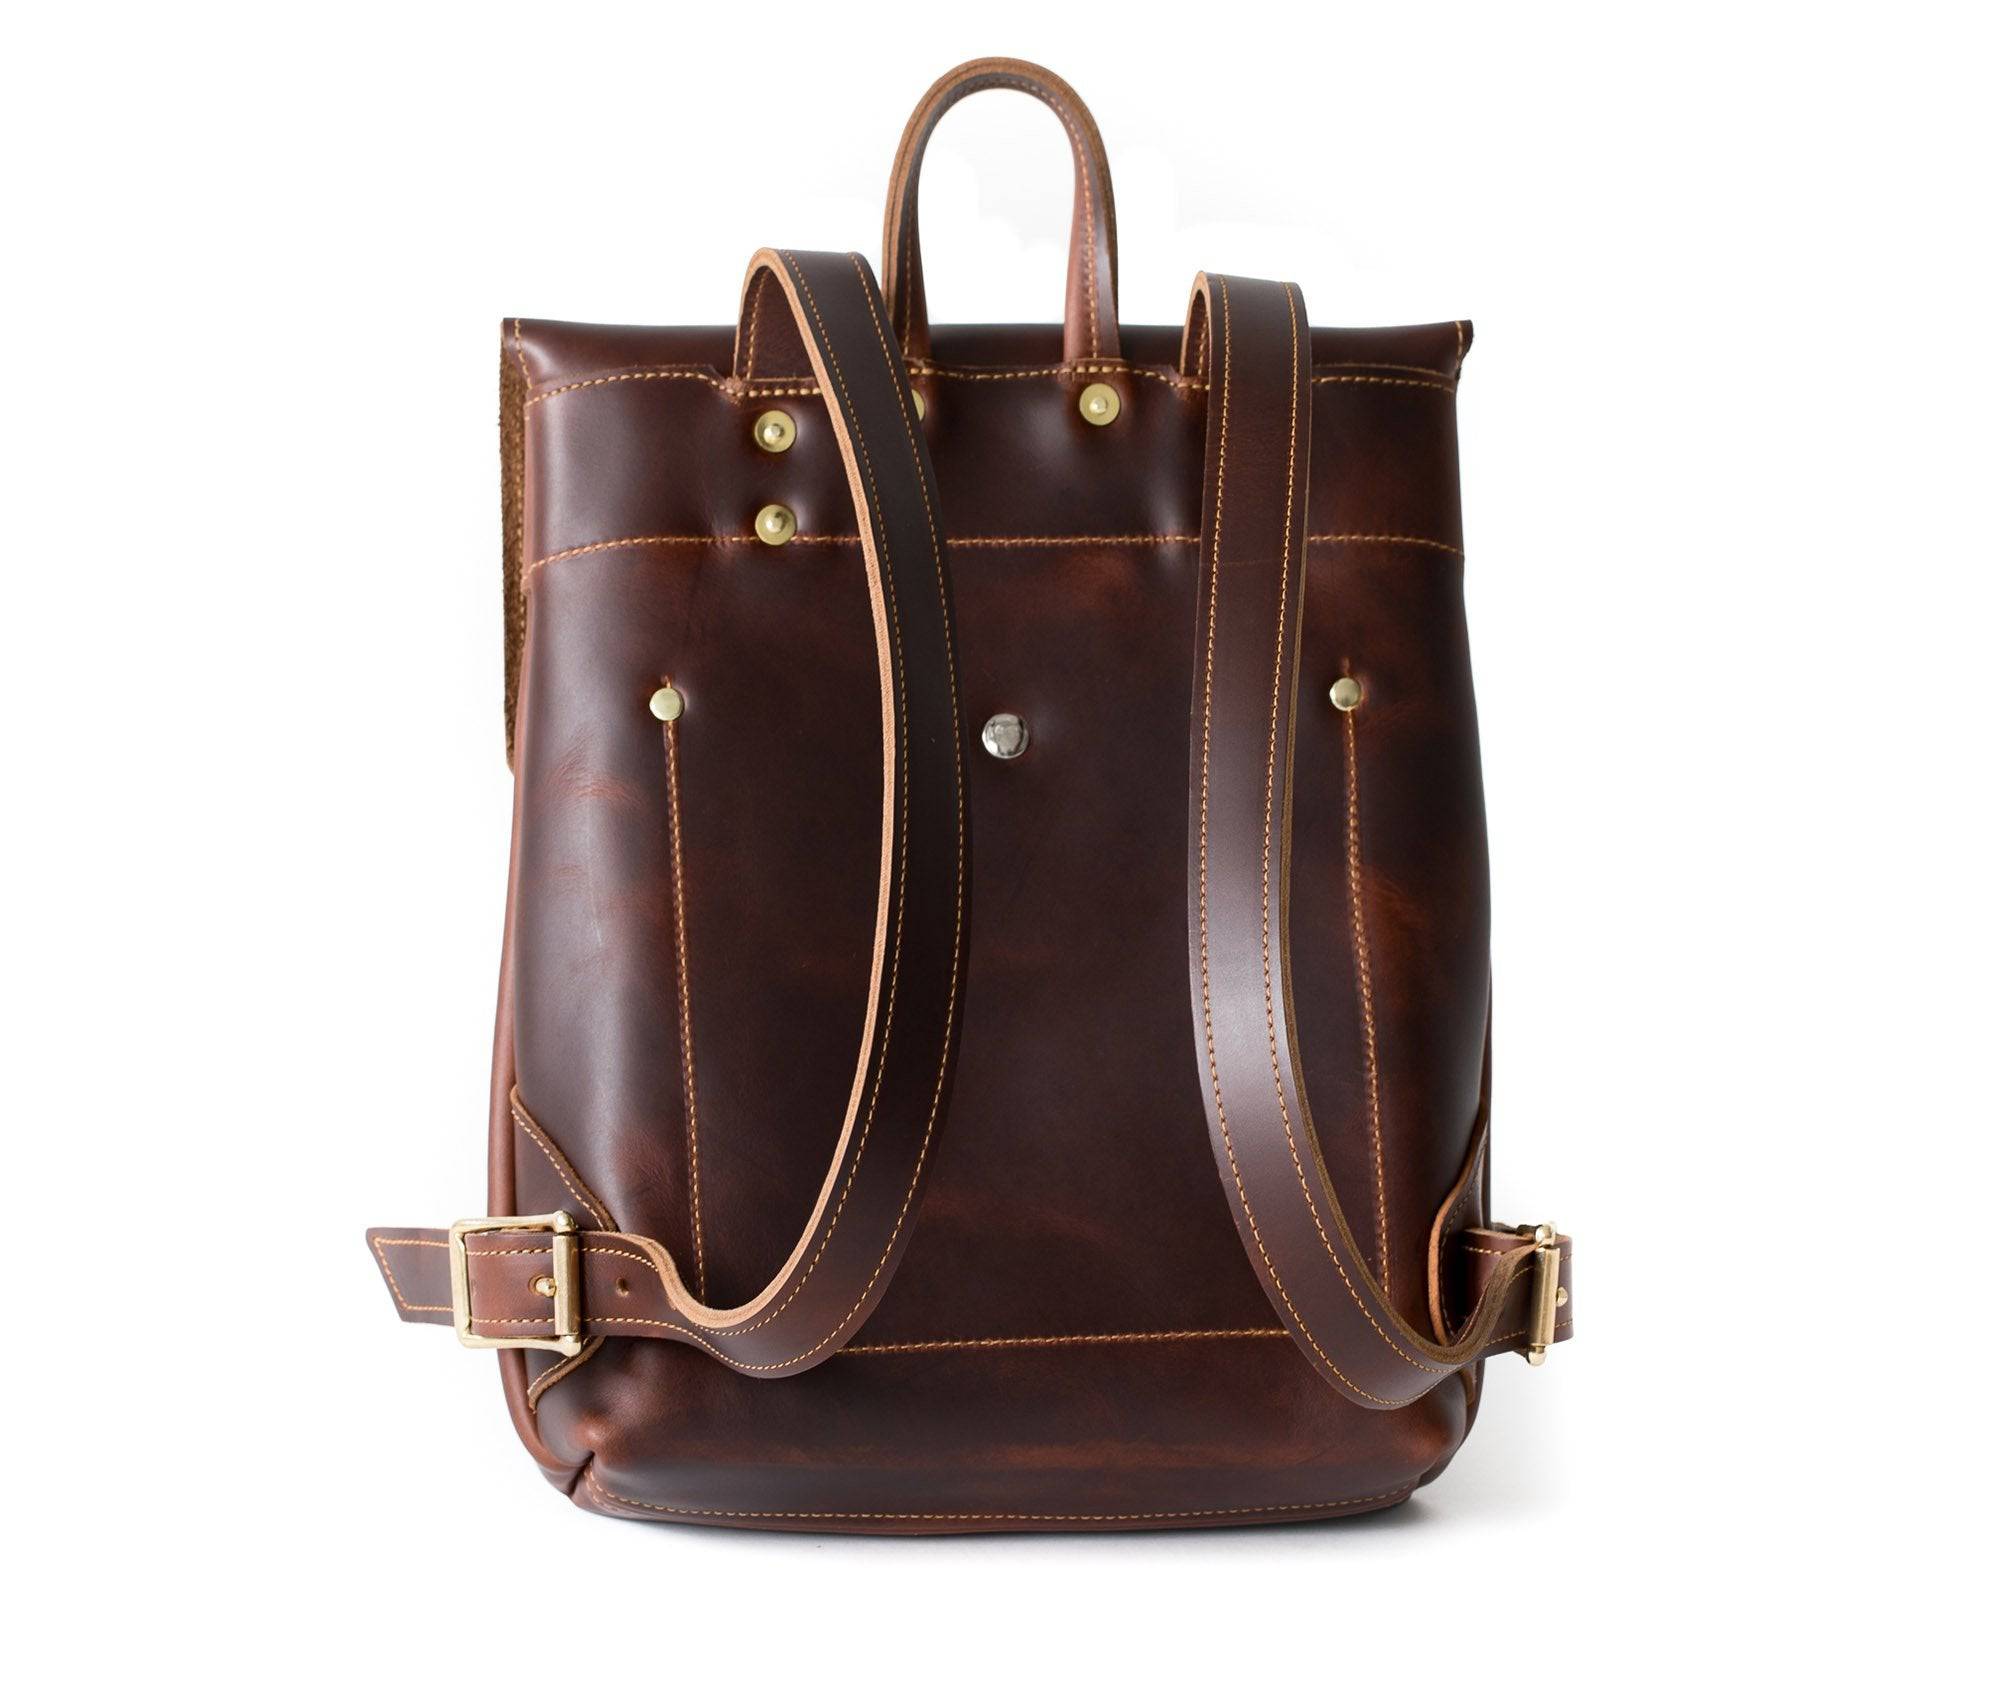  Leather Rucksack by Lifetime Leather Co Lifetime Leather Co Perfumarie